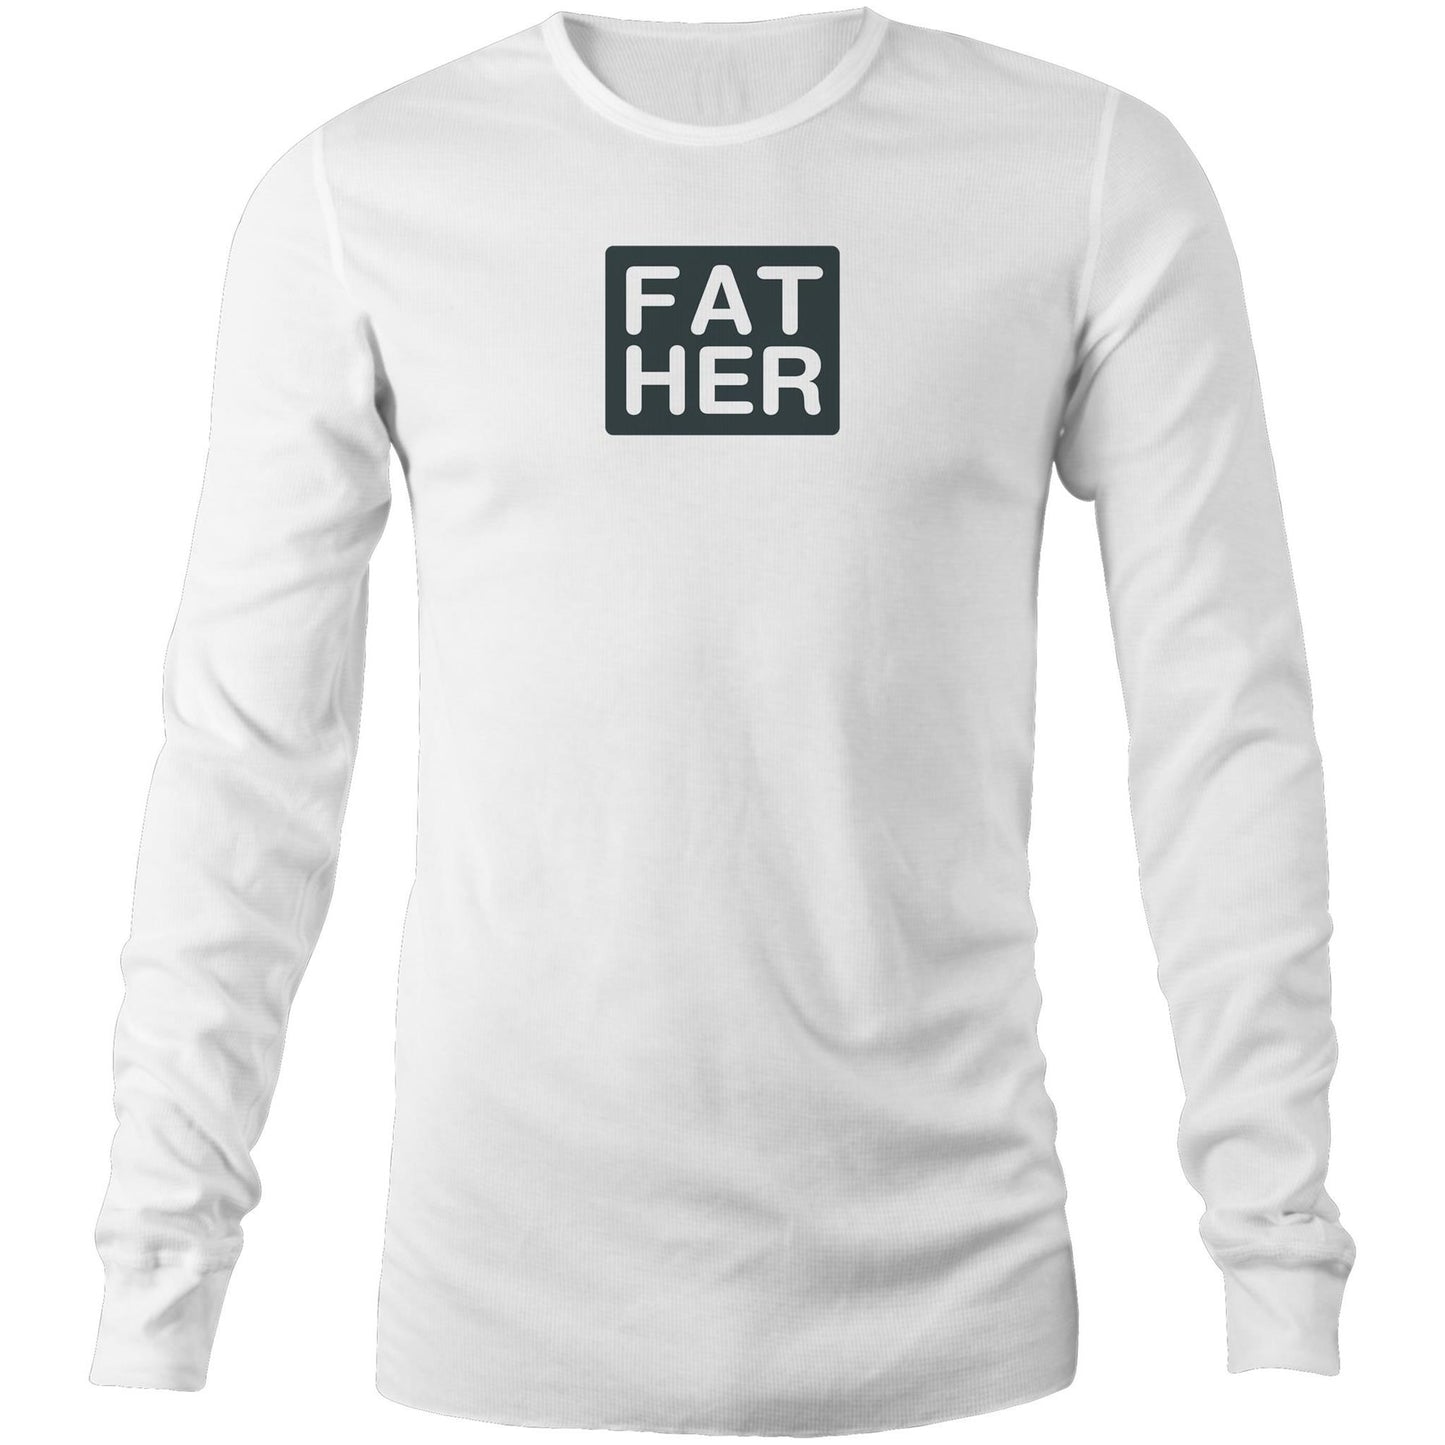 FAT HER Long Sleeve T Shirts